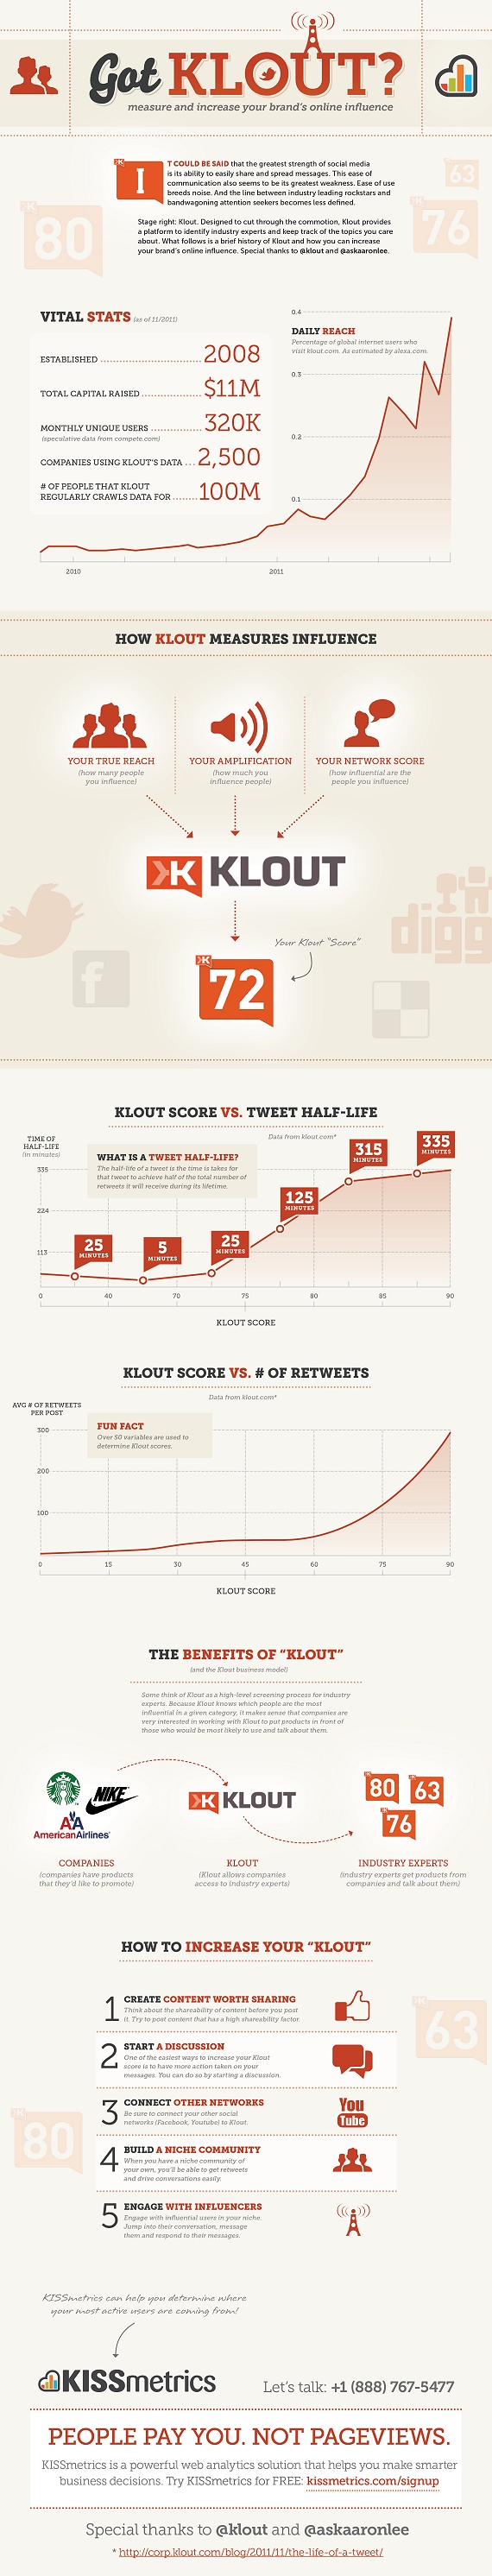 Got Klout? Measure and Increase your Brand’s Online Influence